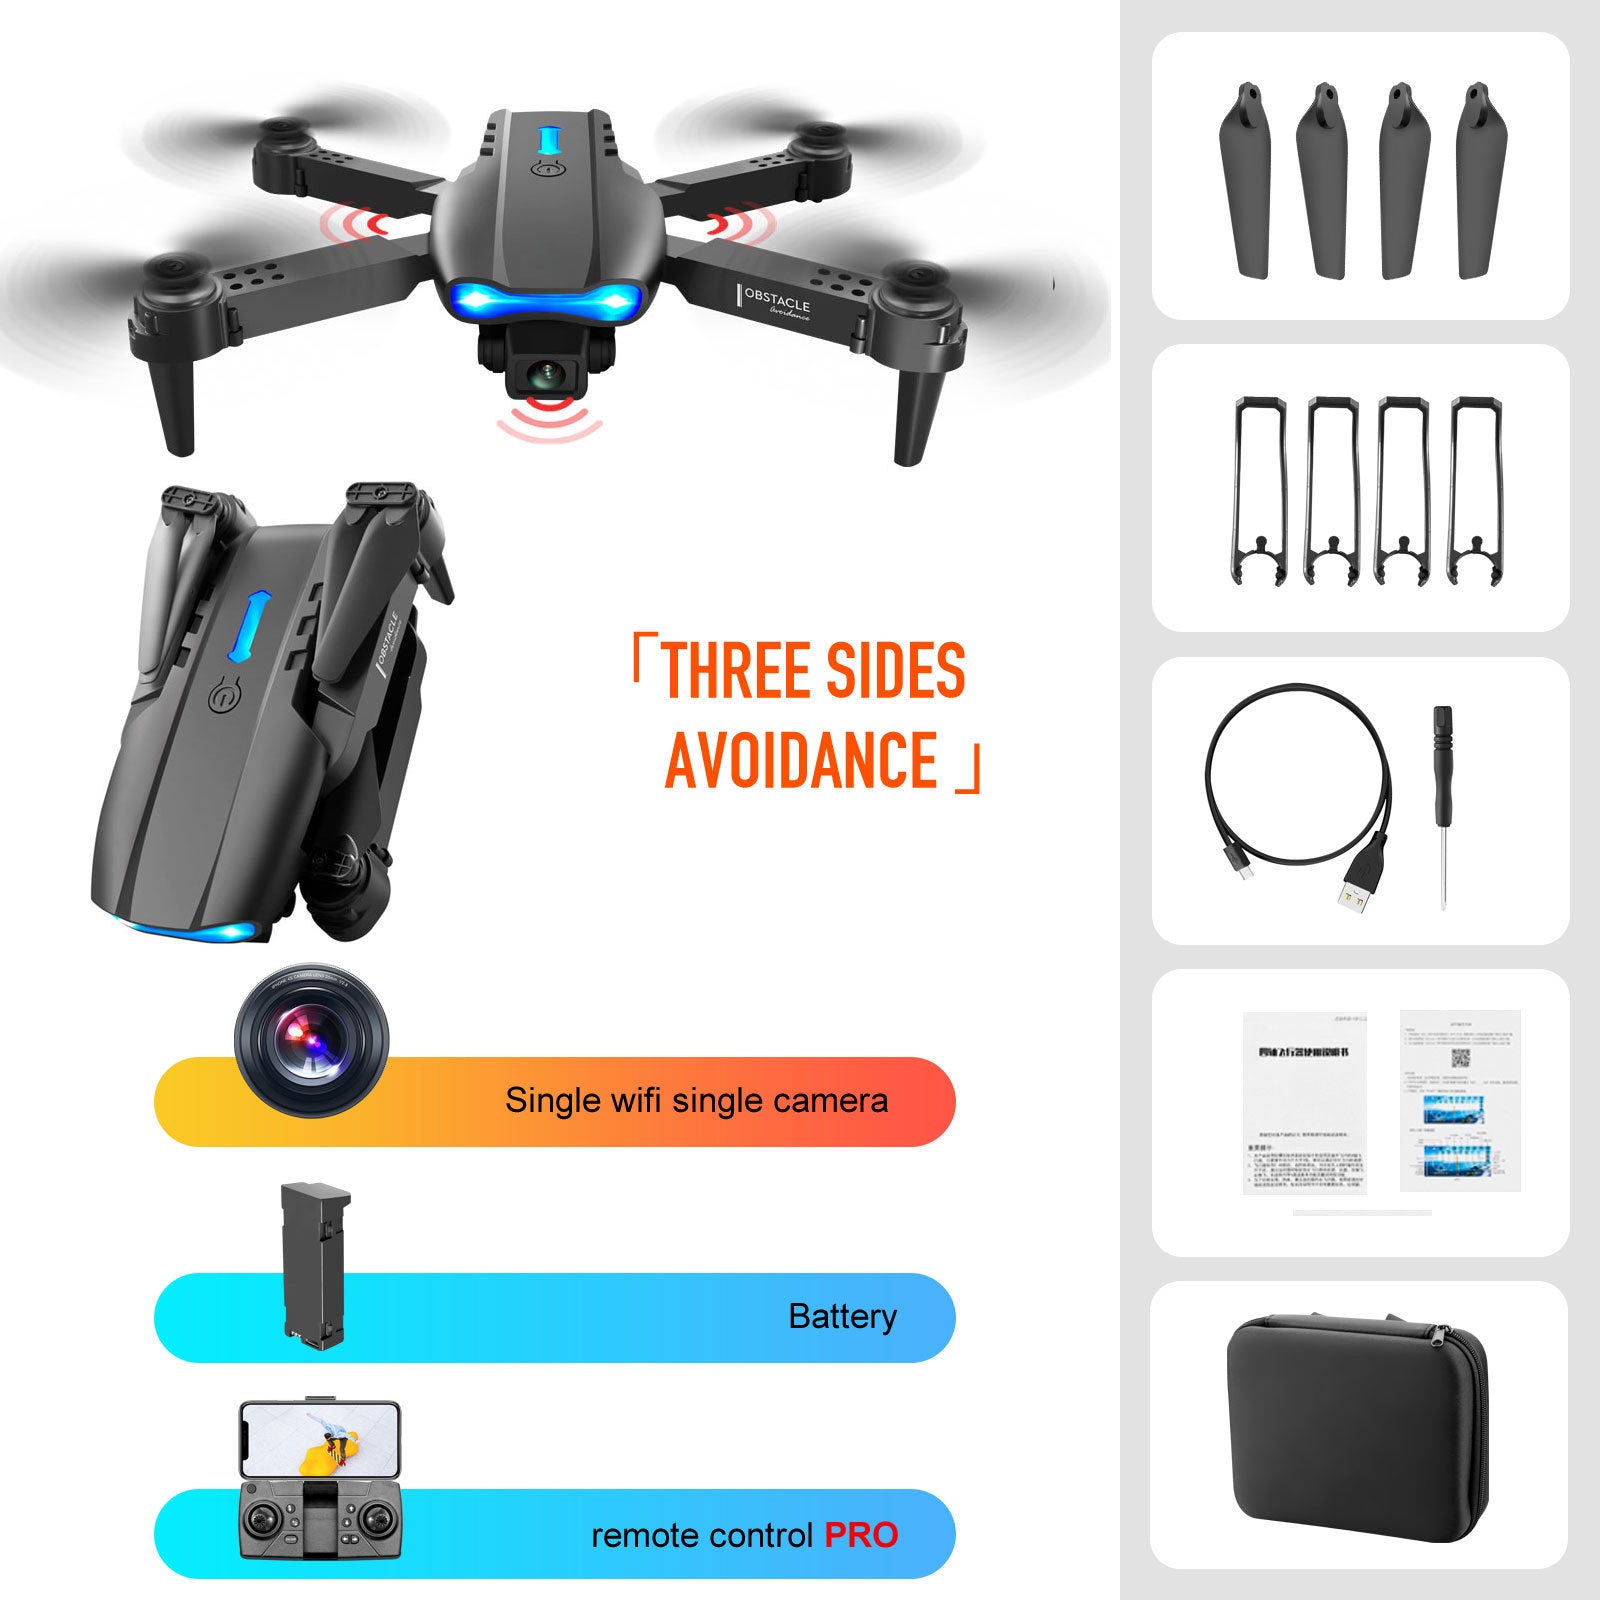 https://www.mydivinebeauty.biz/products/4k-dual-camera-remote-control-three-sided-obstacle-avoidance-drone